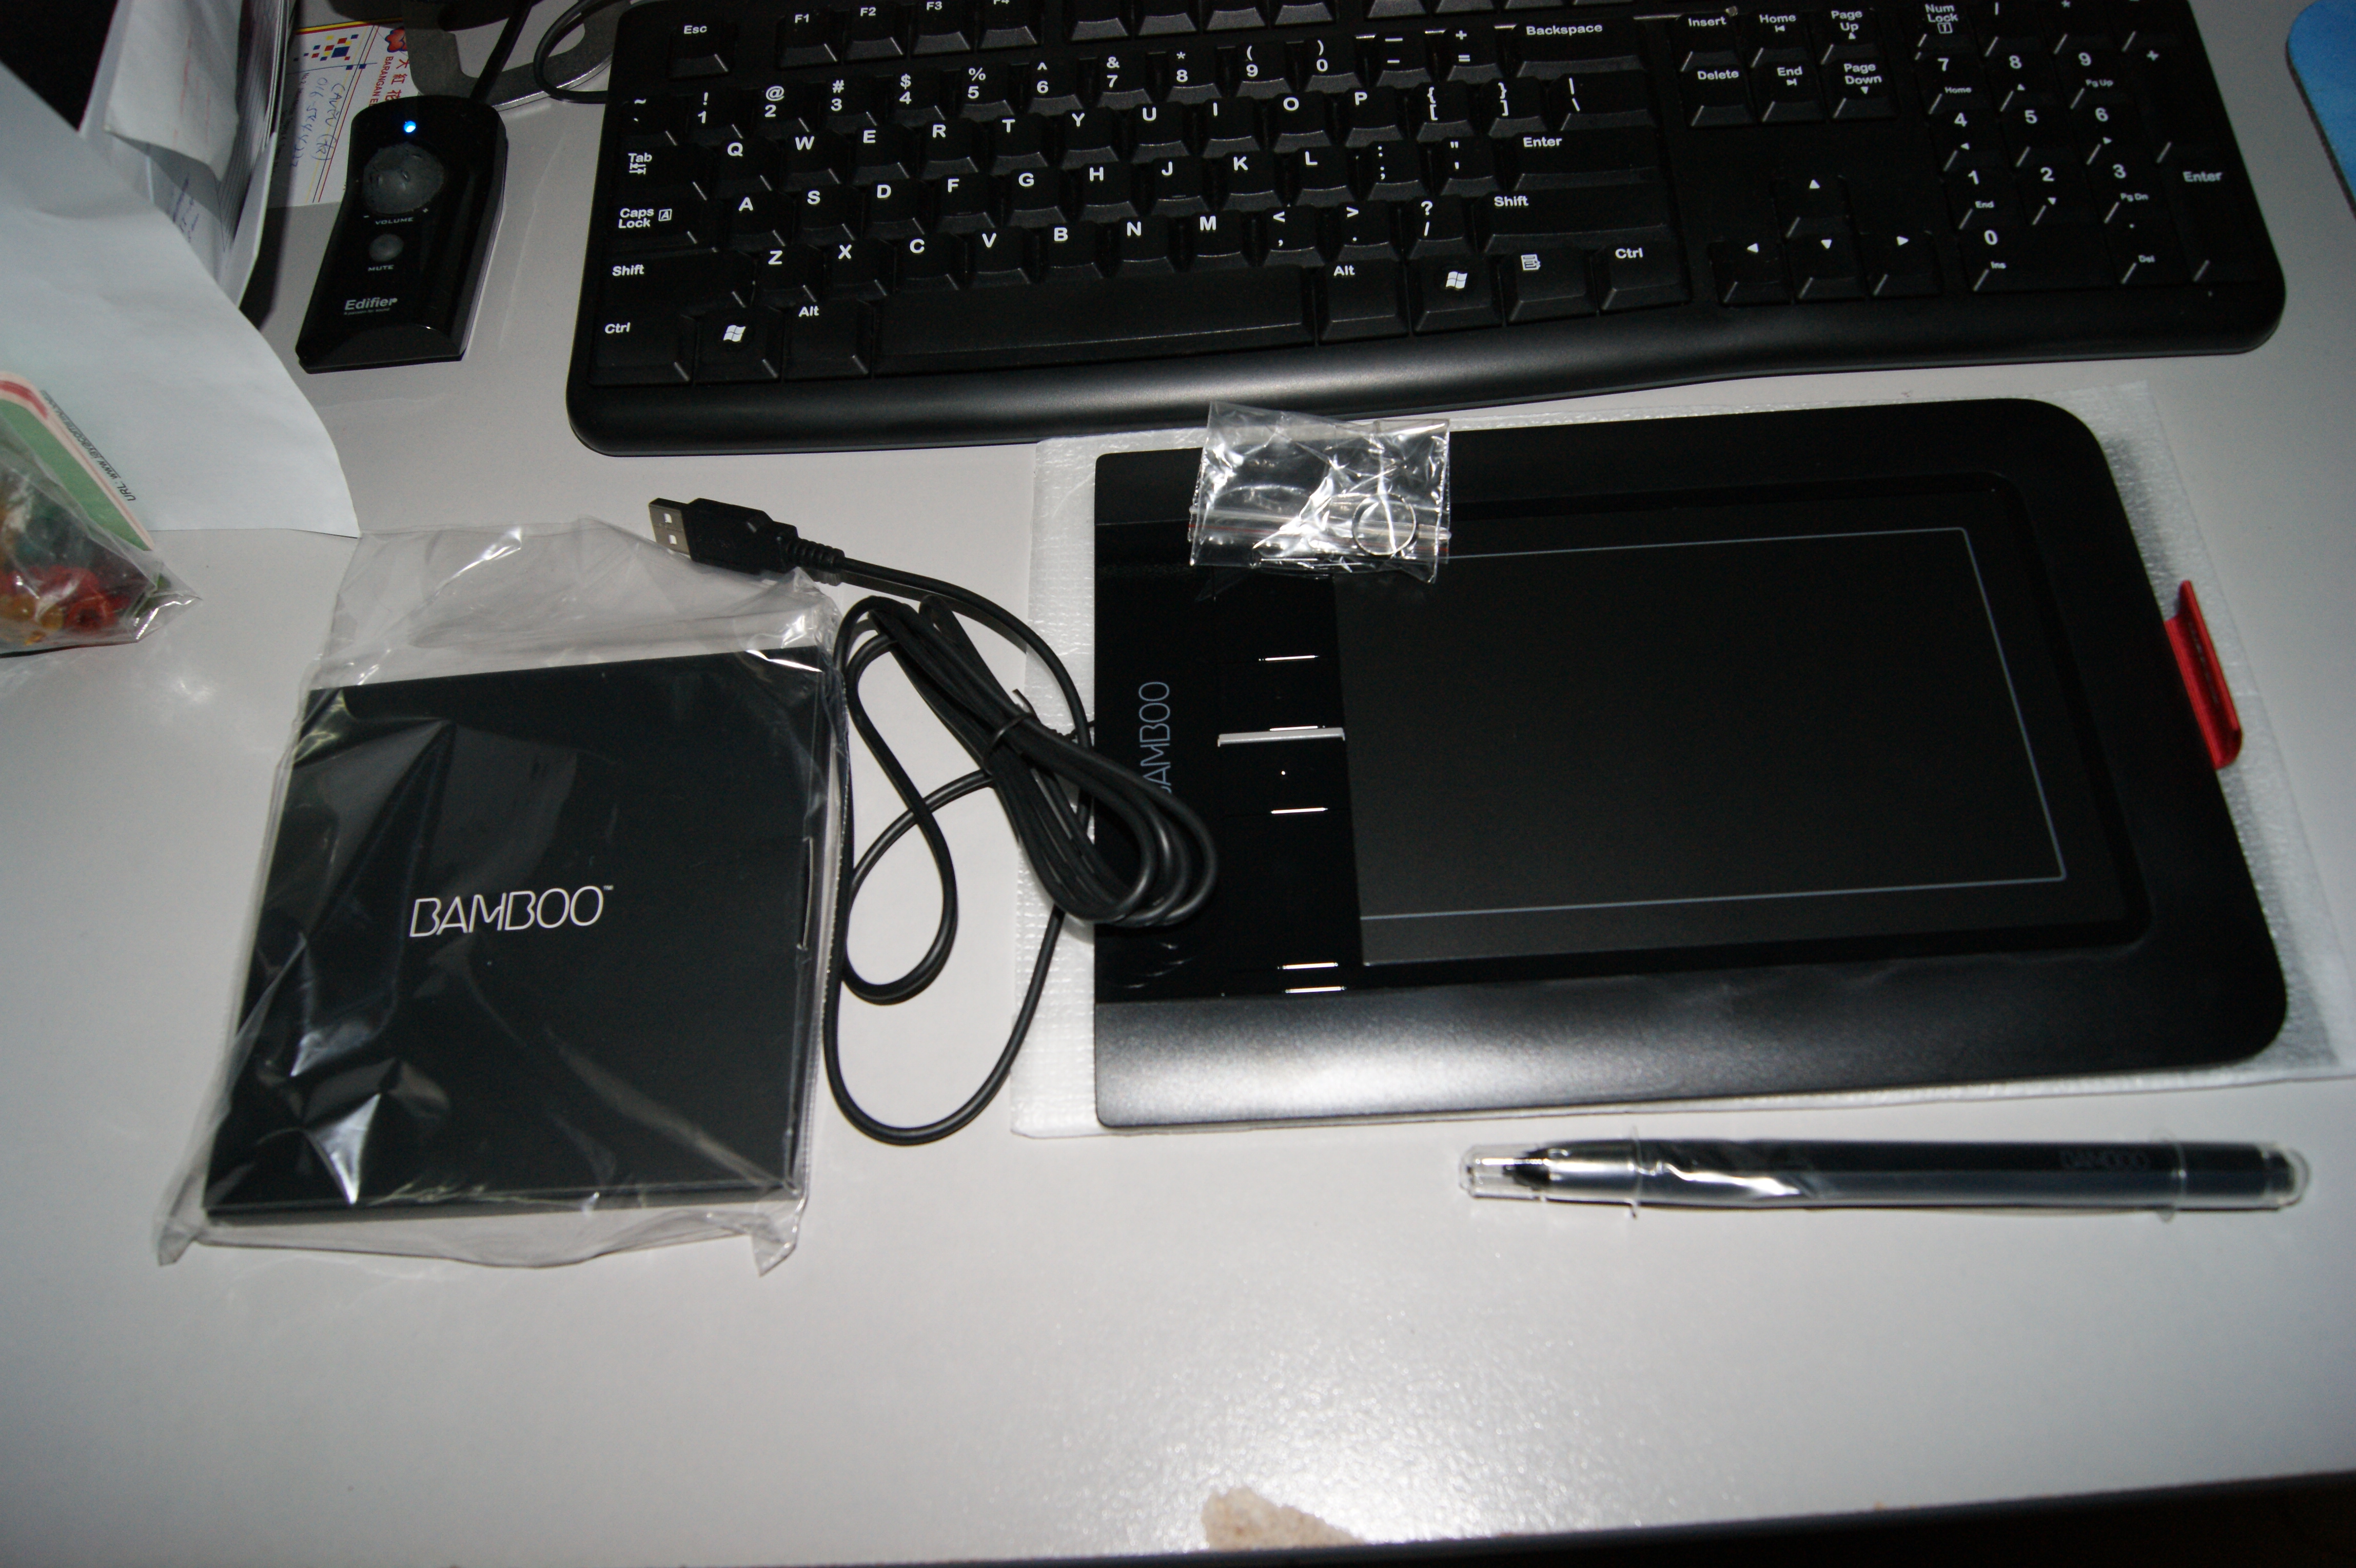 Wacom Driver For Bamboo Cth-460 For Macos Catalina